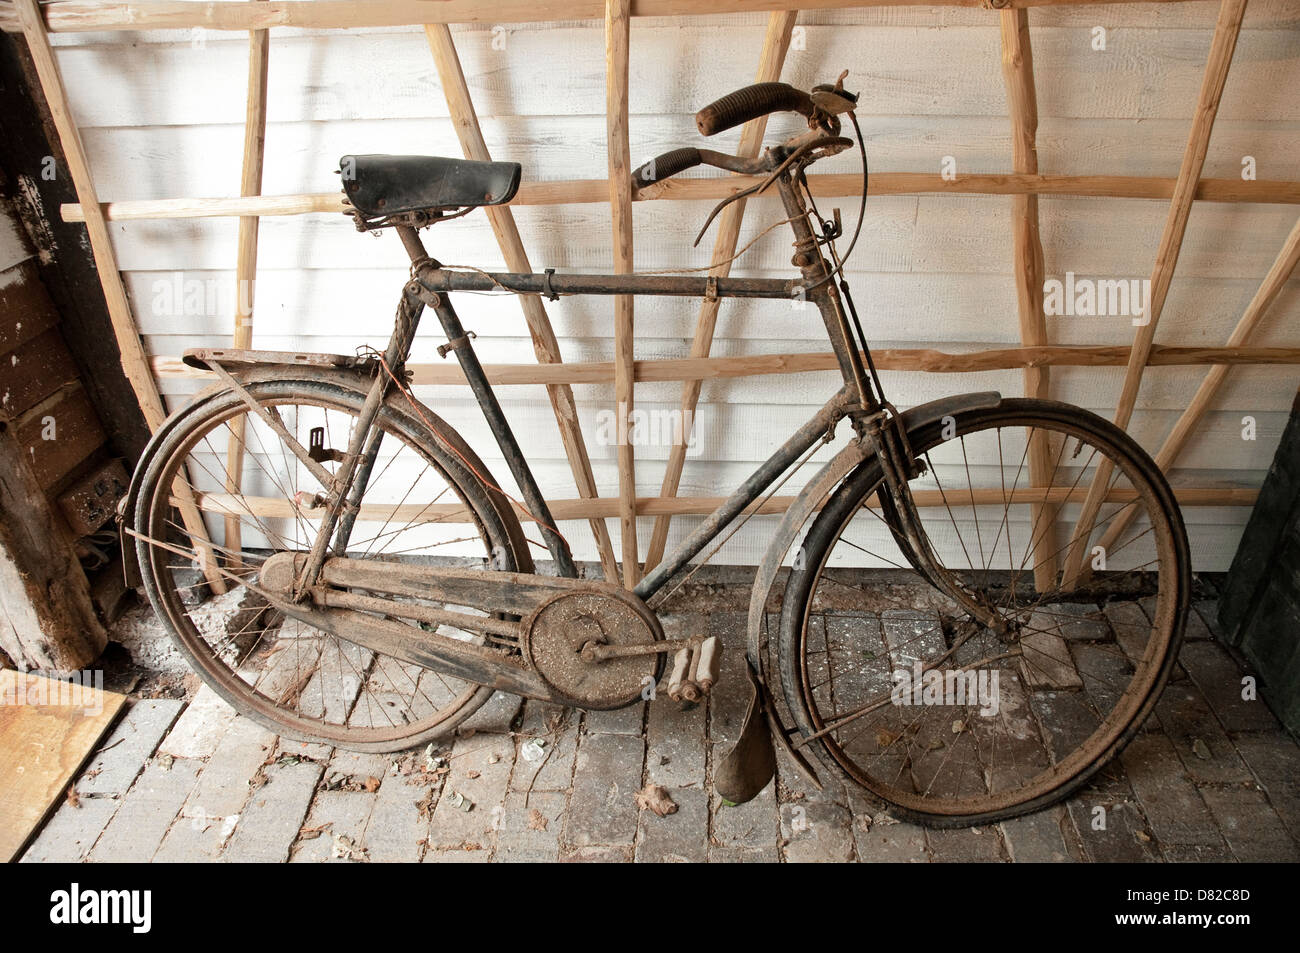 An old Bicycle leaning against a wall in an outbuilding. UK. Stock Photo